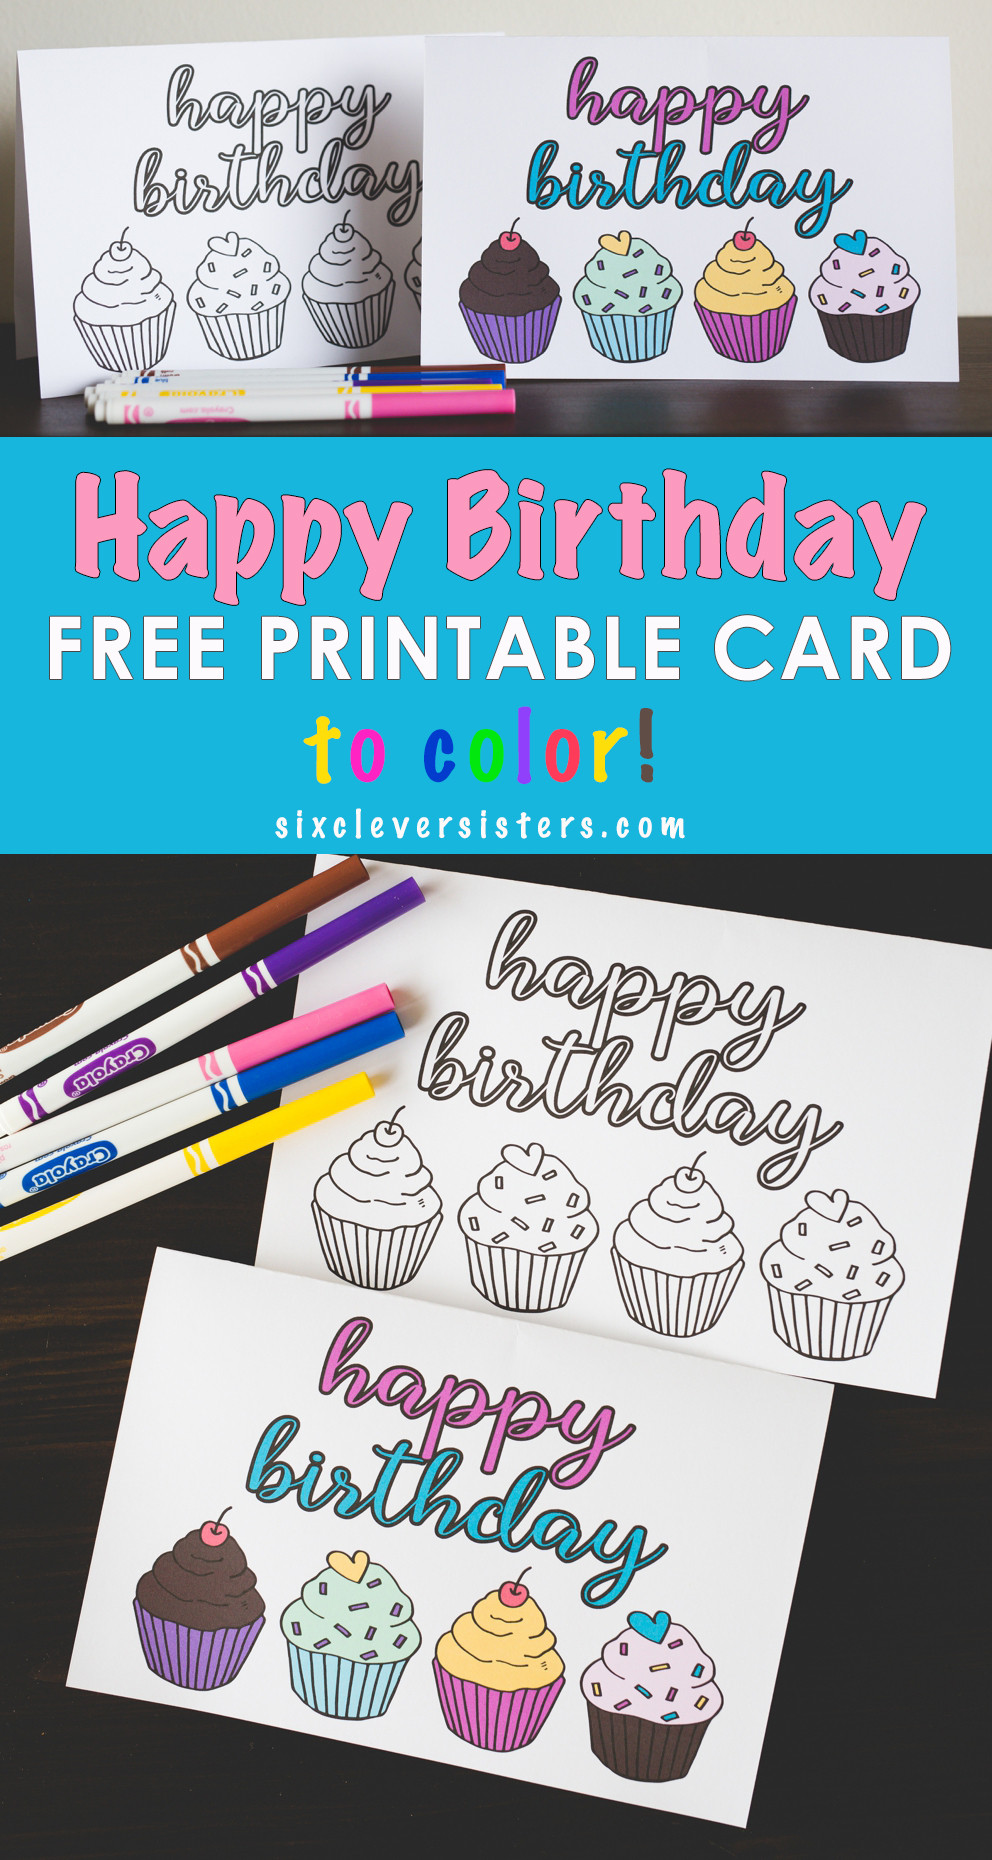 Print Birthday Cards
 FREE Printable Happy Birthday Card Six Clever Sisters